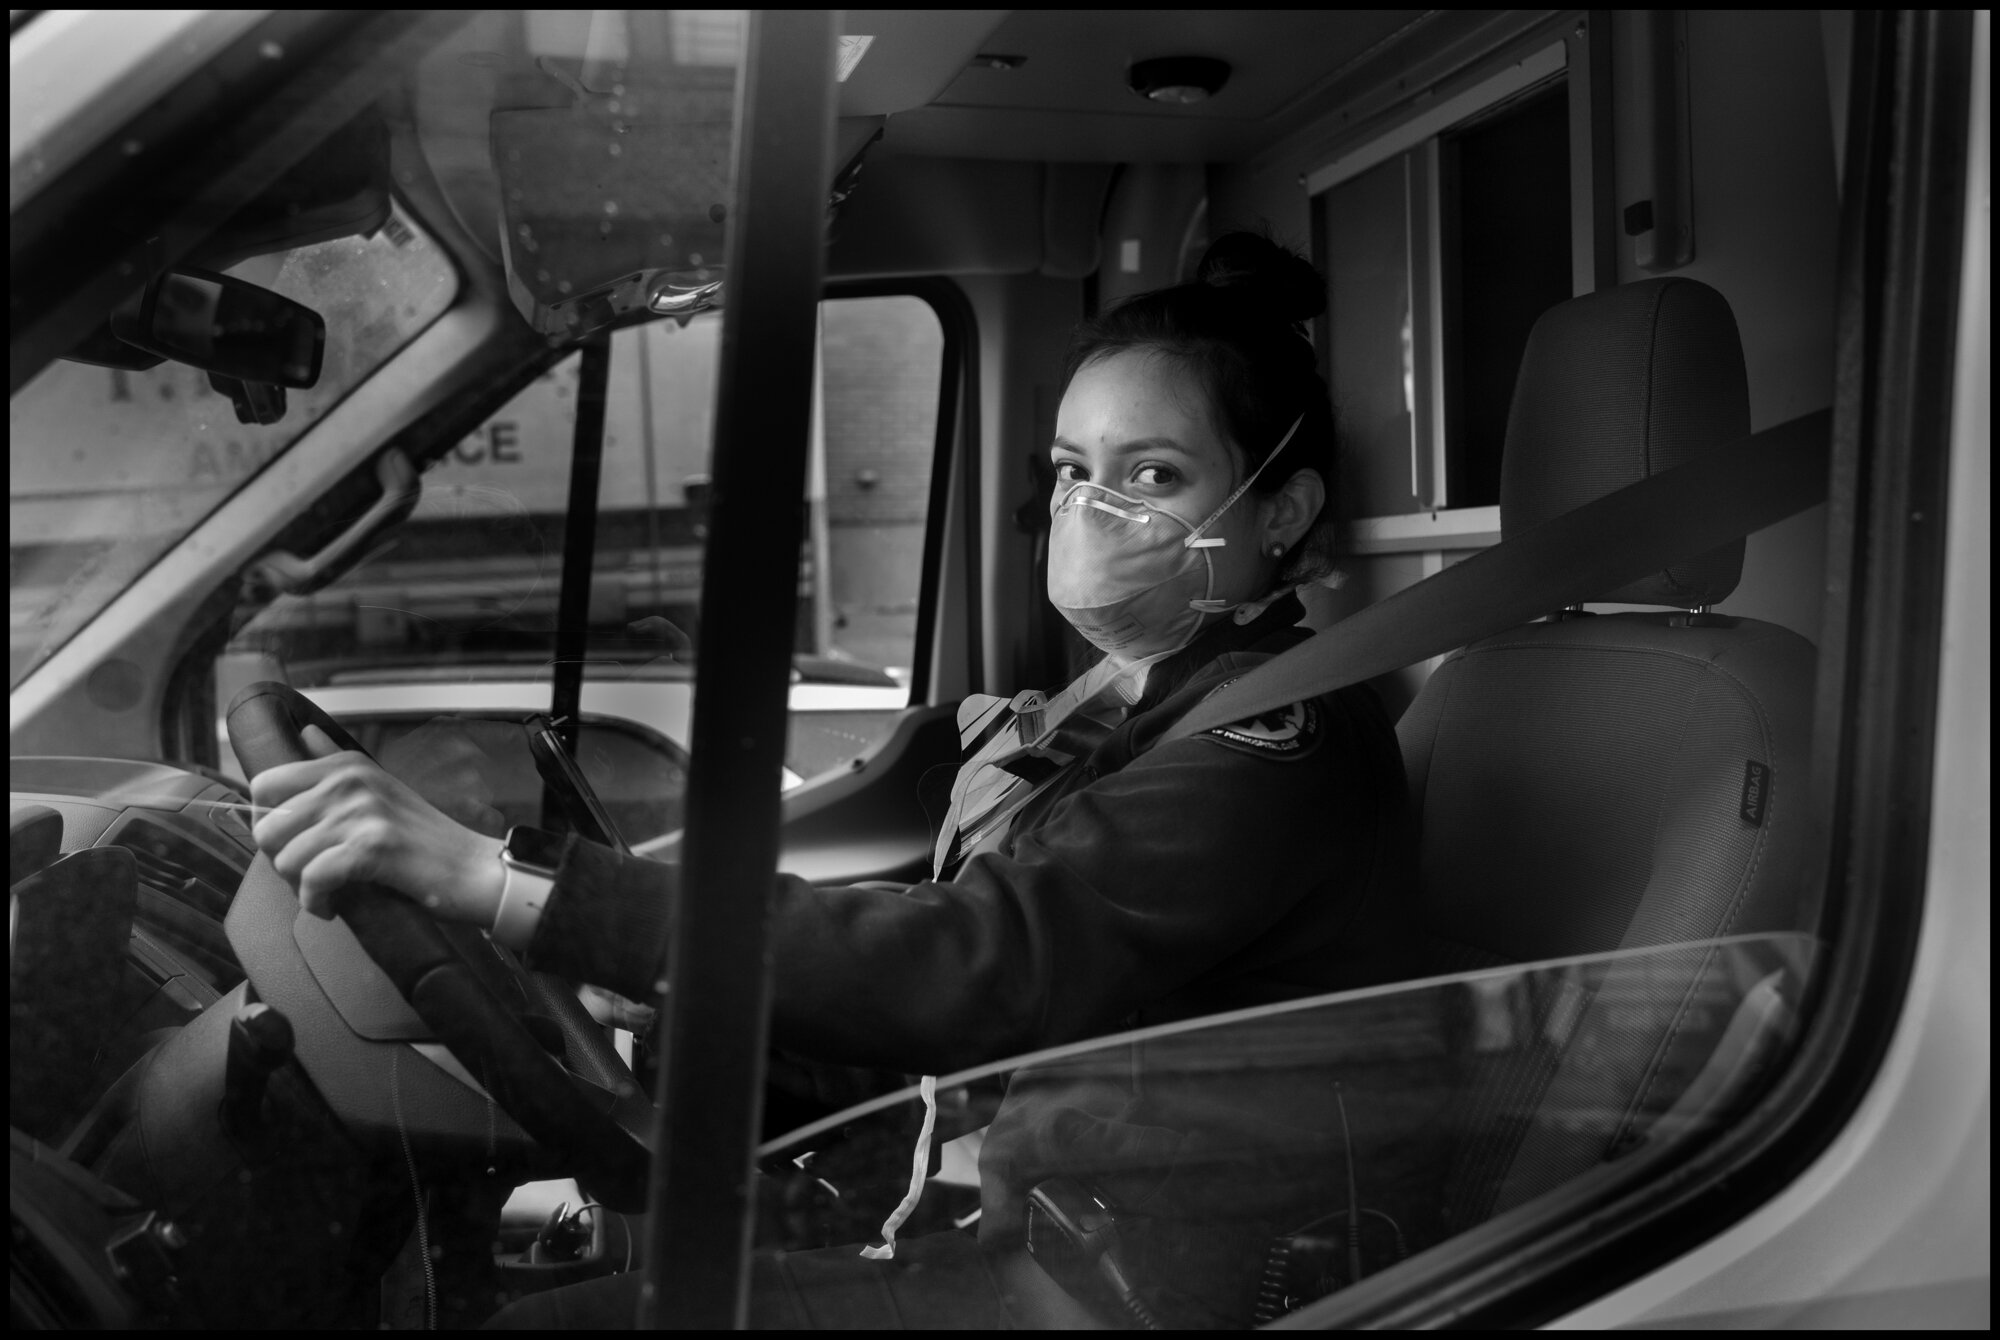  Carla, 32, and ambulance worker.   March 29, 2020. © Peter Turnley  ID# 07-005 